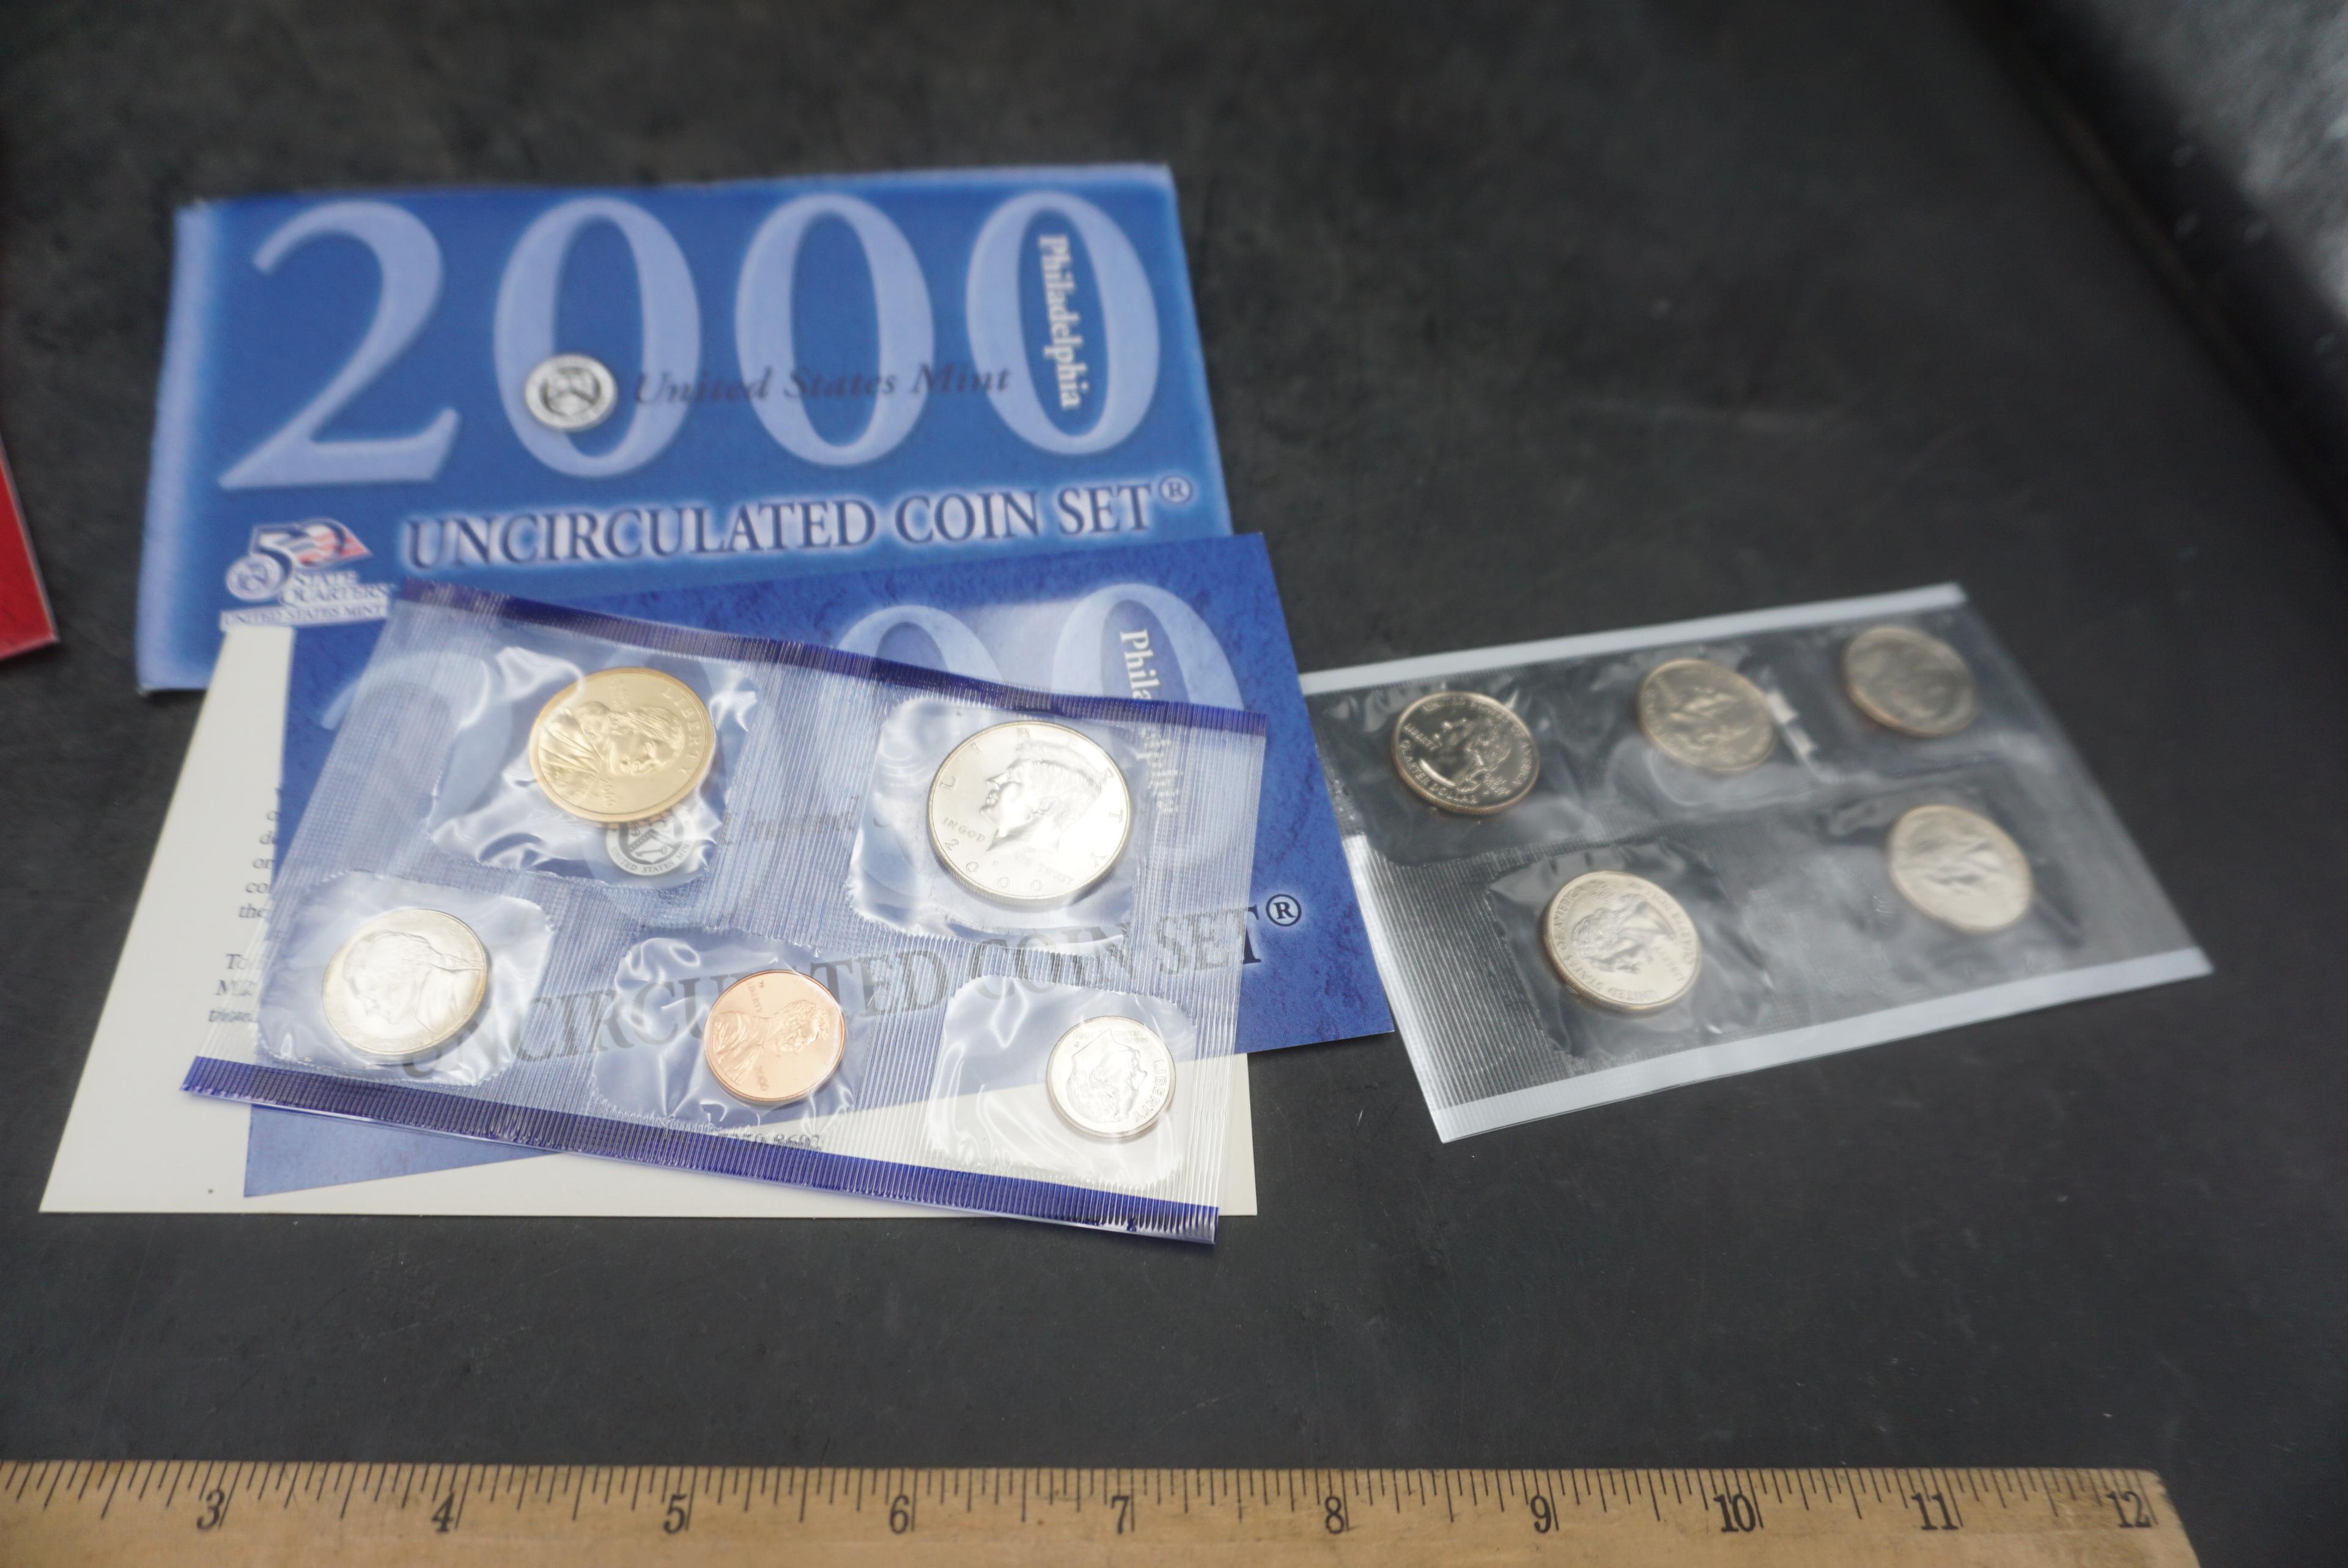 2000 United States Mint Uncirculated Coin Sets